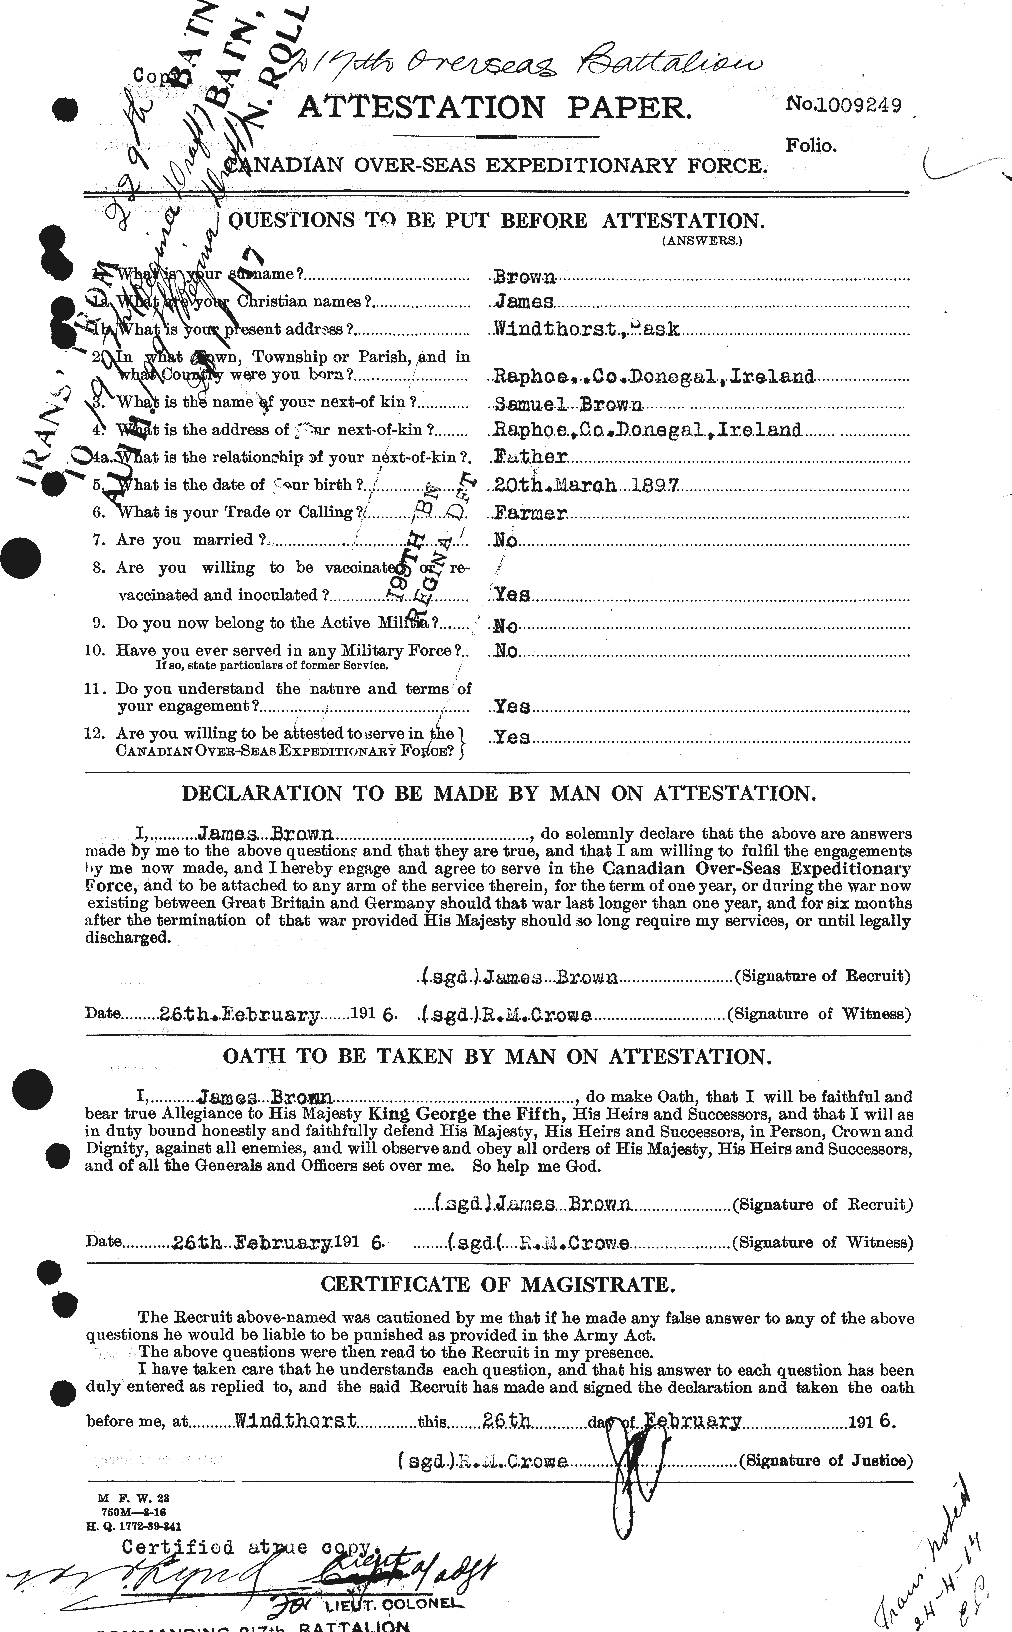 Personnel Records of the First World War - CEF 265781a